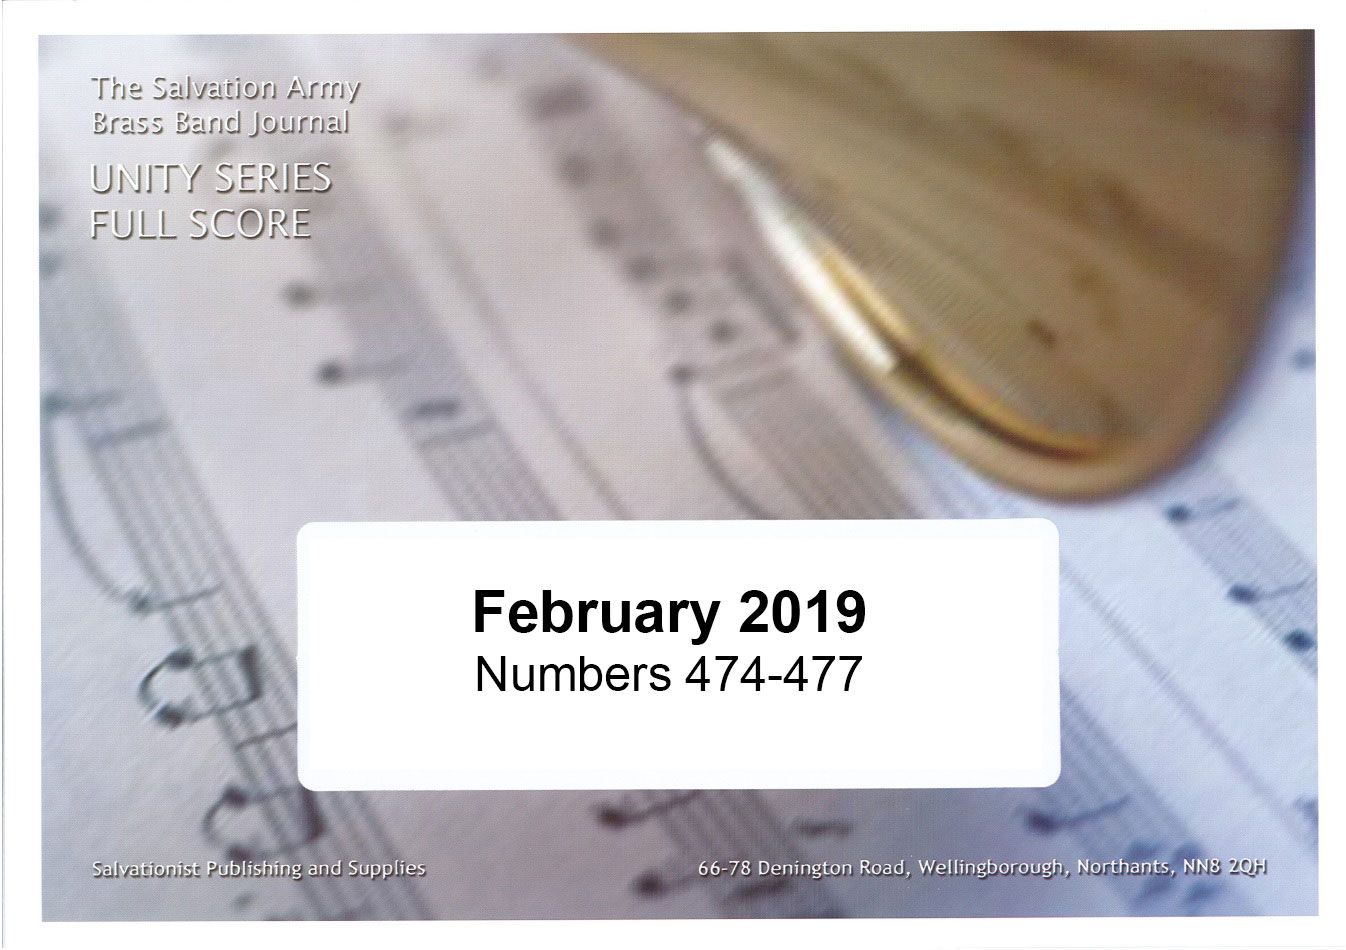 Unity Series Band Journal February 2019 - Numbers 474-477